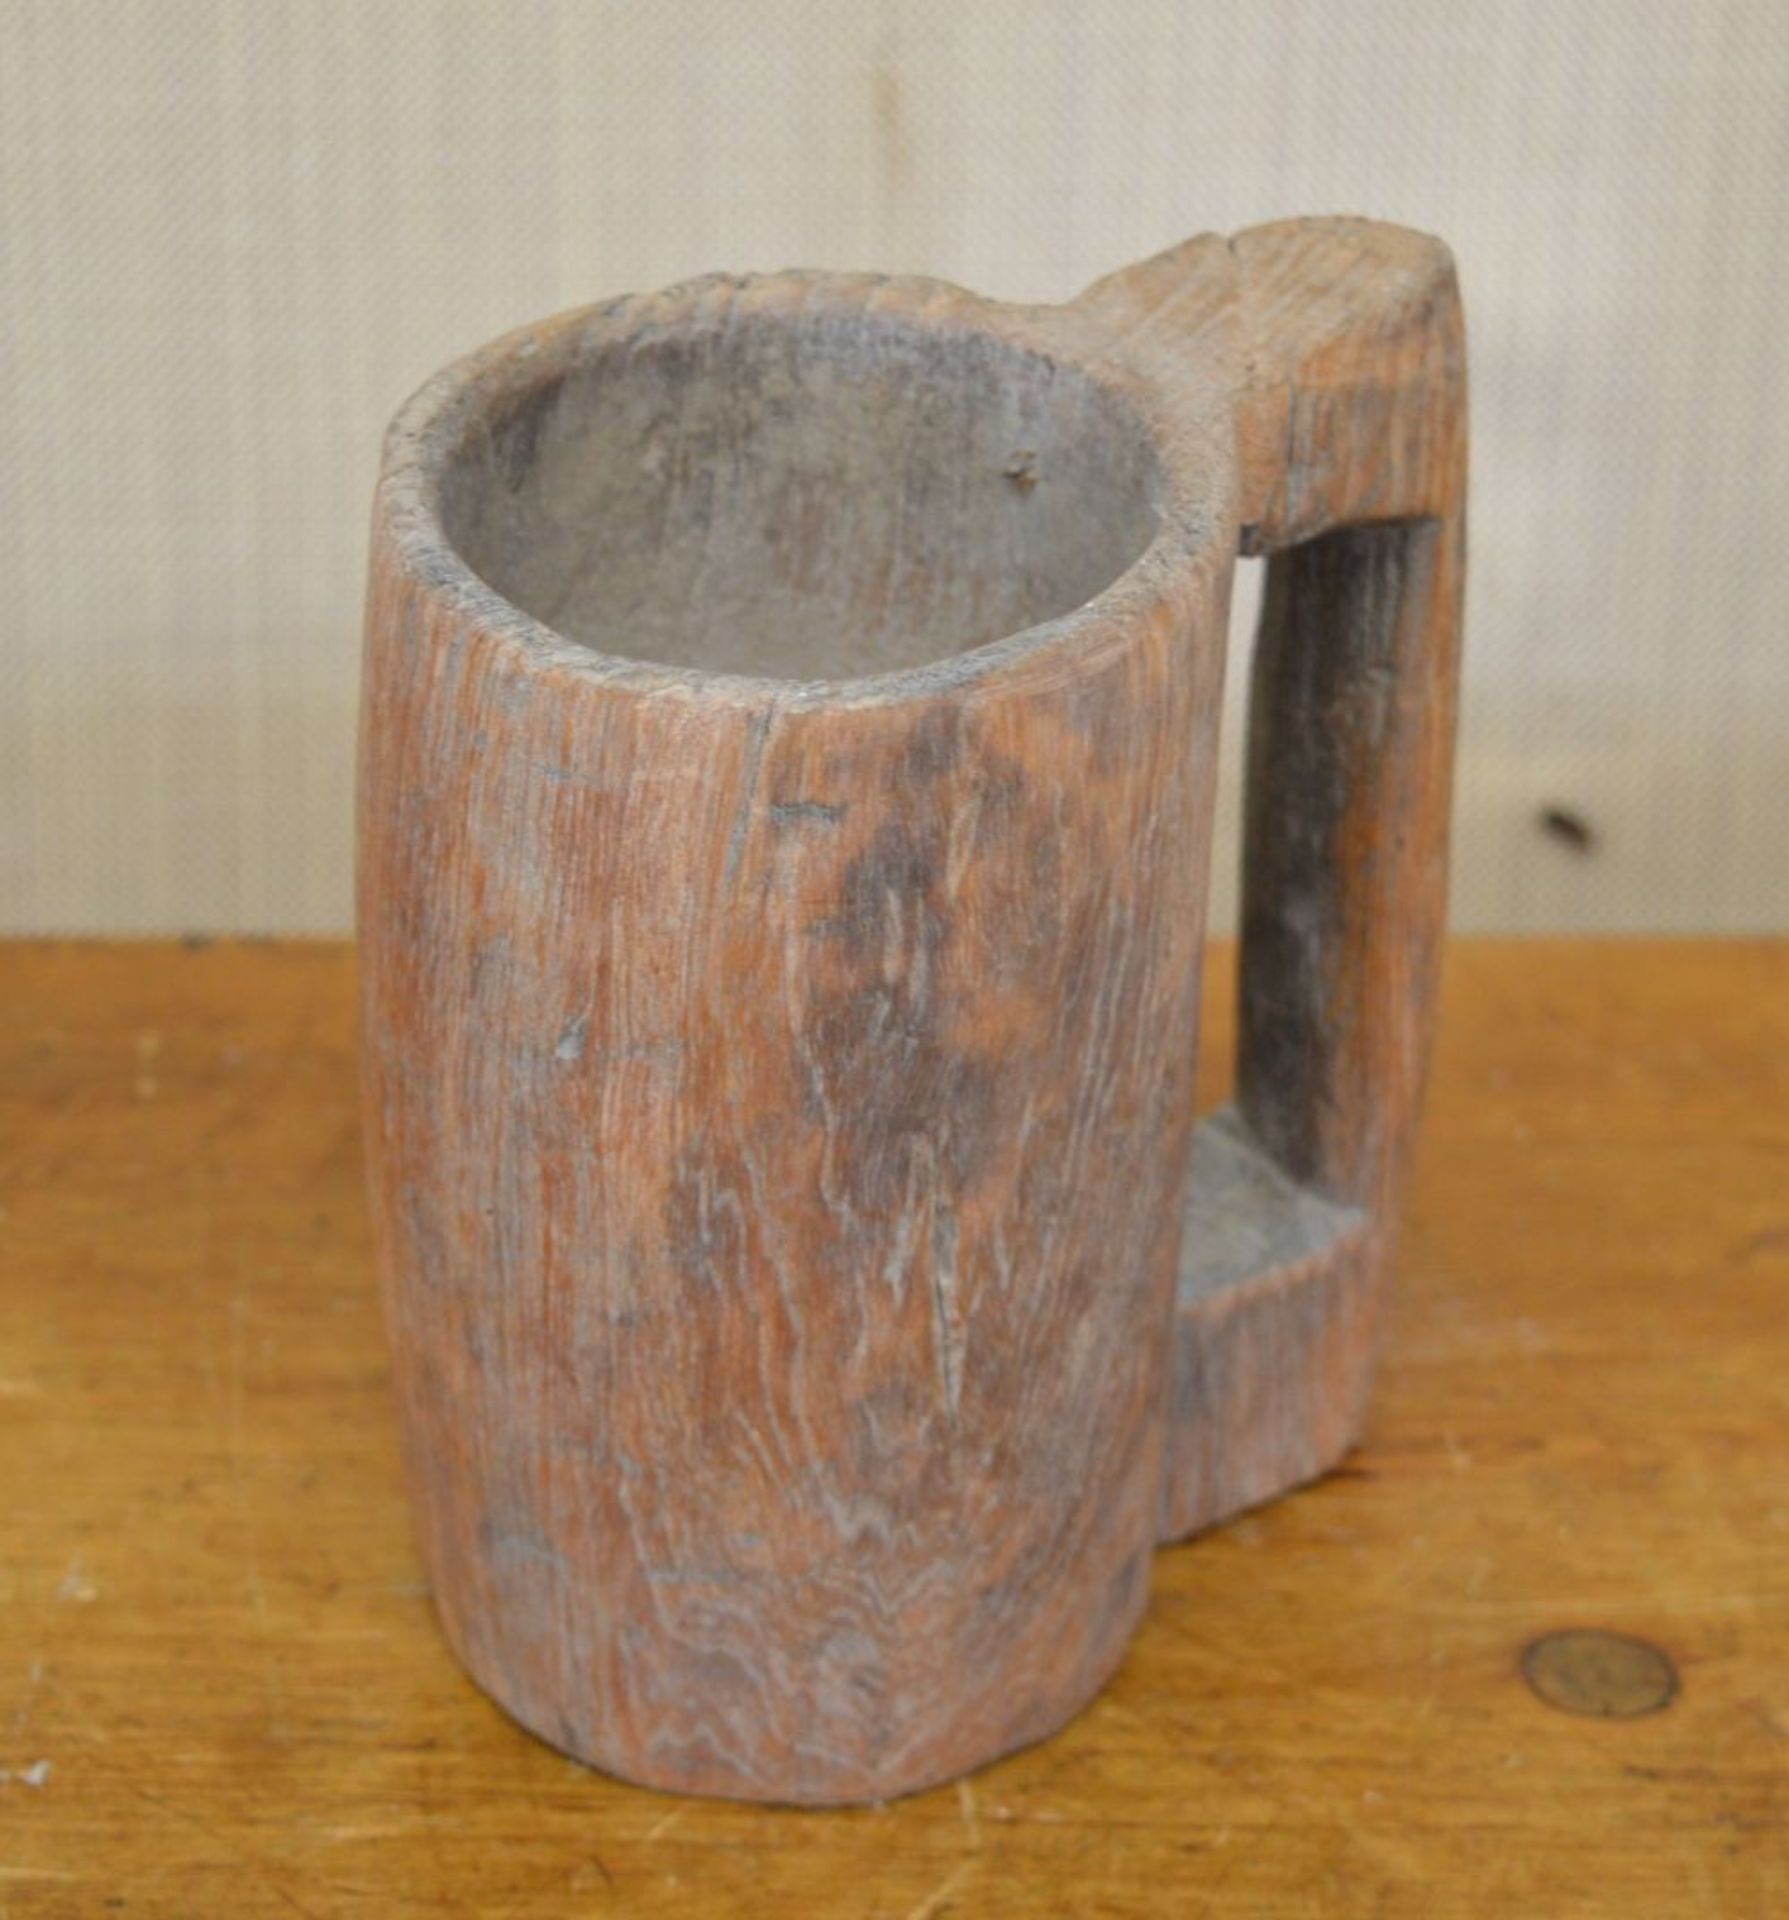 18TH-CENTURY DUGOUT DRINKING VESSEL